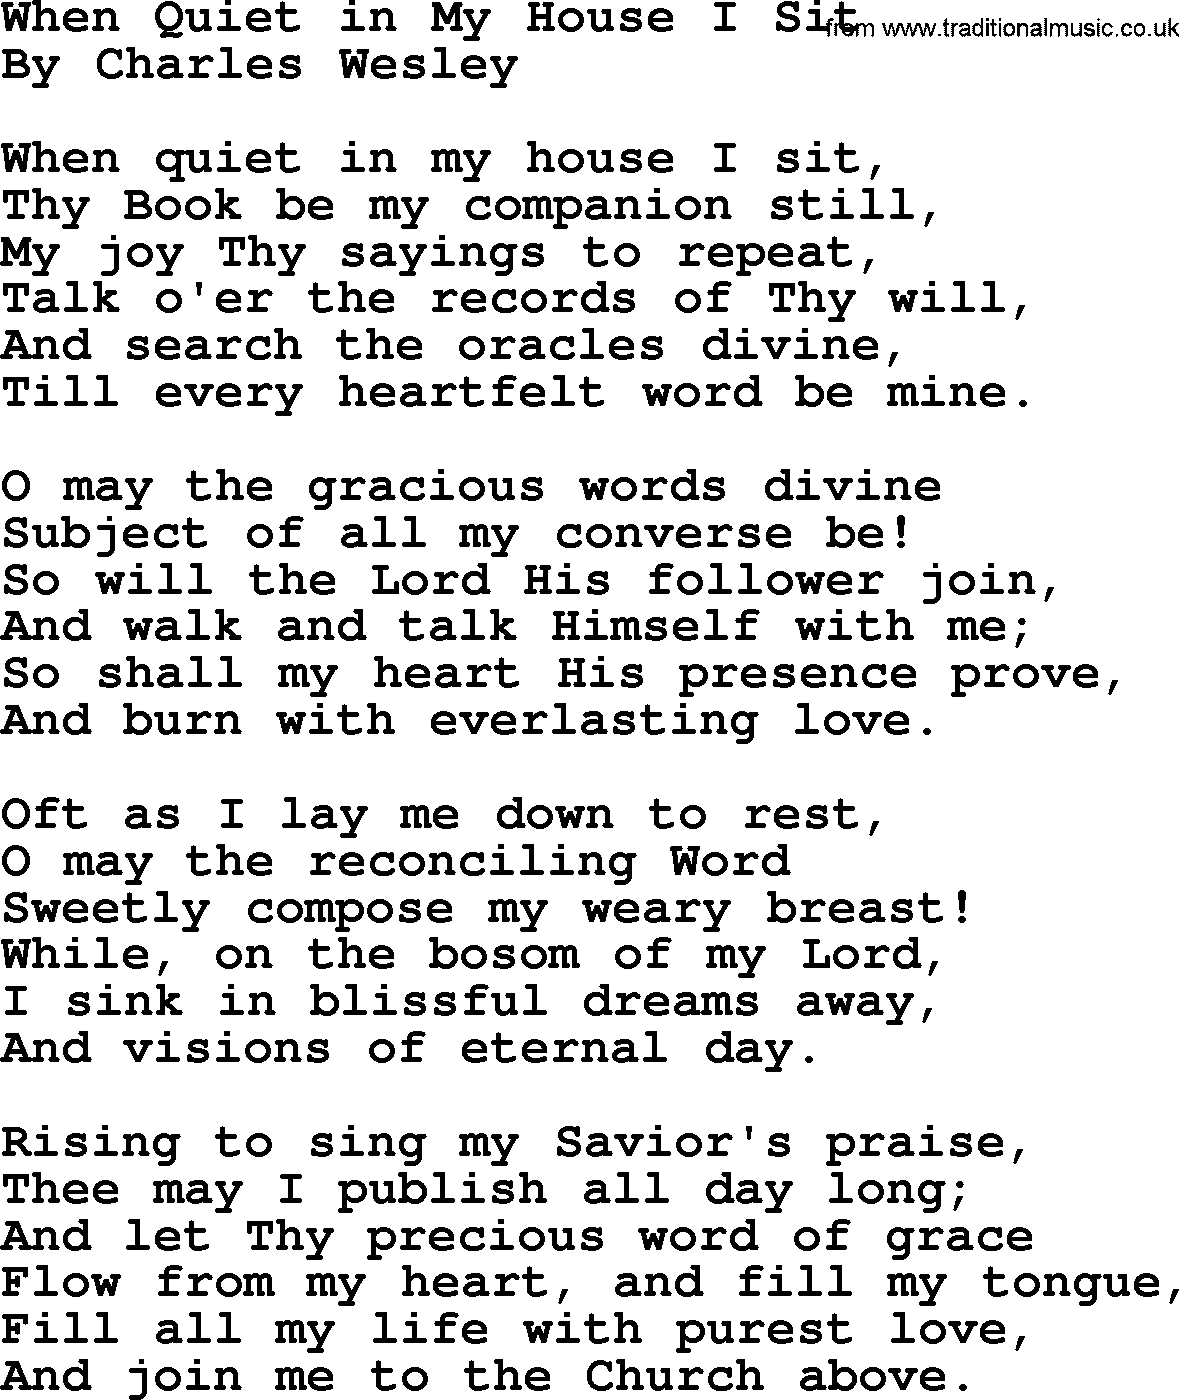 Charles Wesley hymn: When Quiet In My House I Sit, lyrics